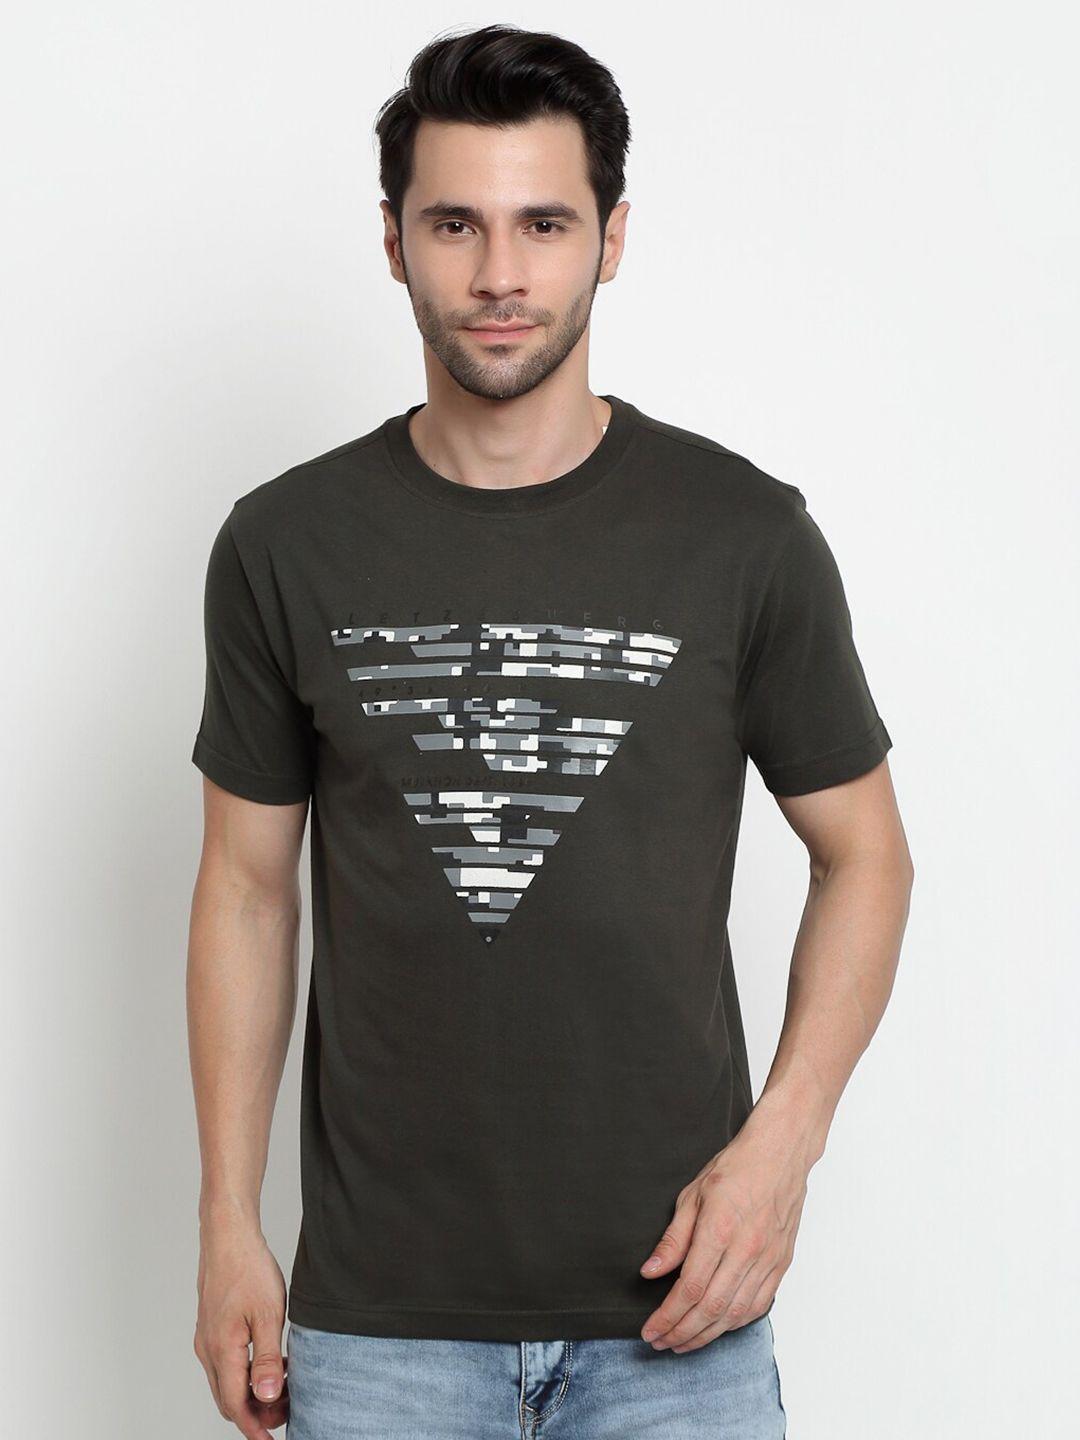 cantabil men olive brown printed cotton t-shirt